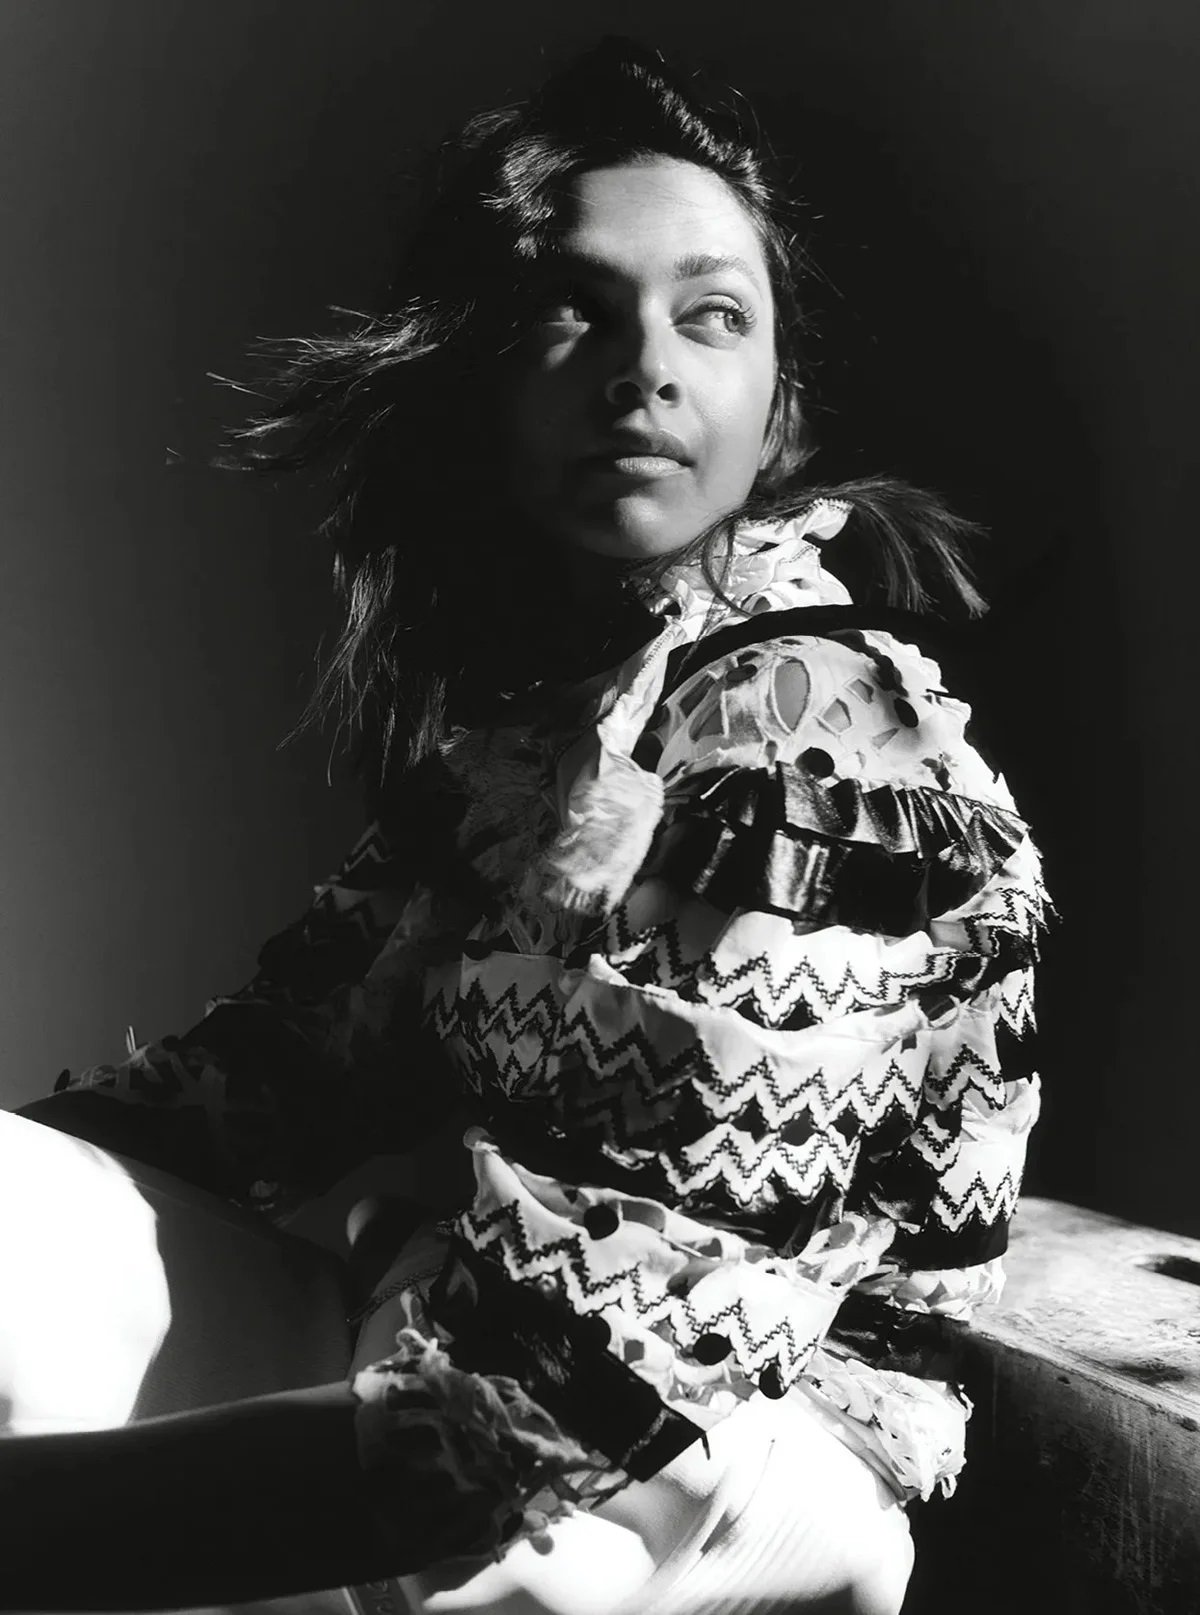 Deepika Padukone to Star in Global Louis Vuitton Campaign, VOGUE India